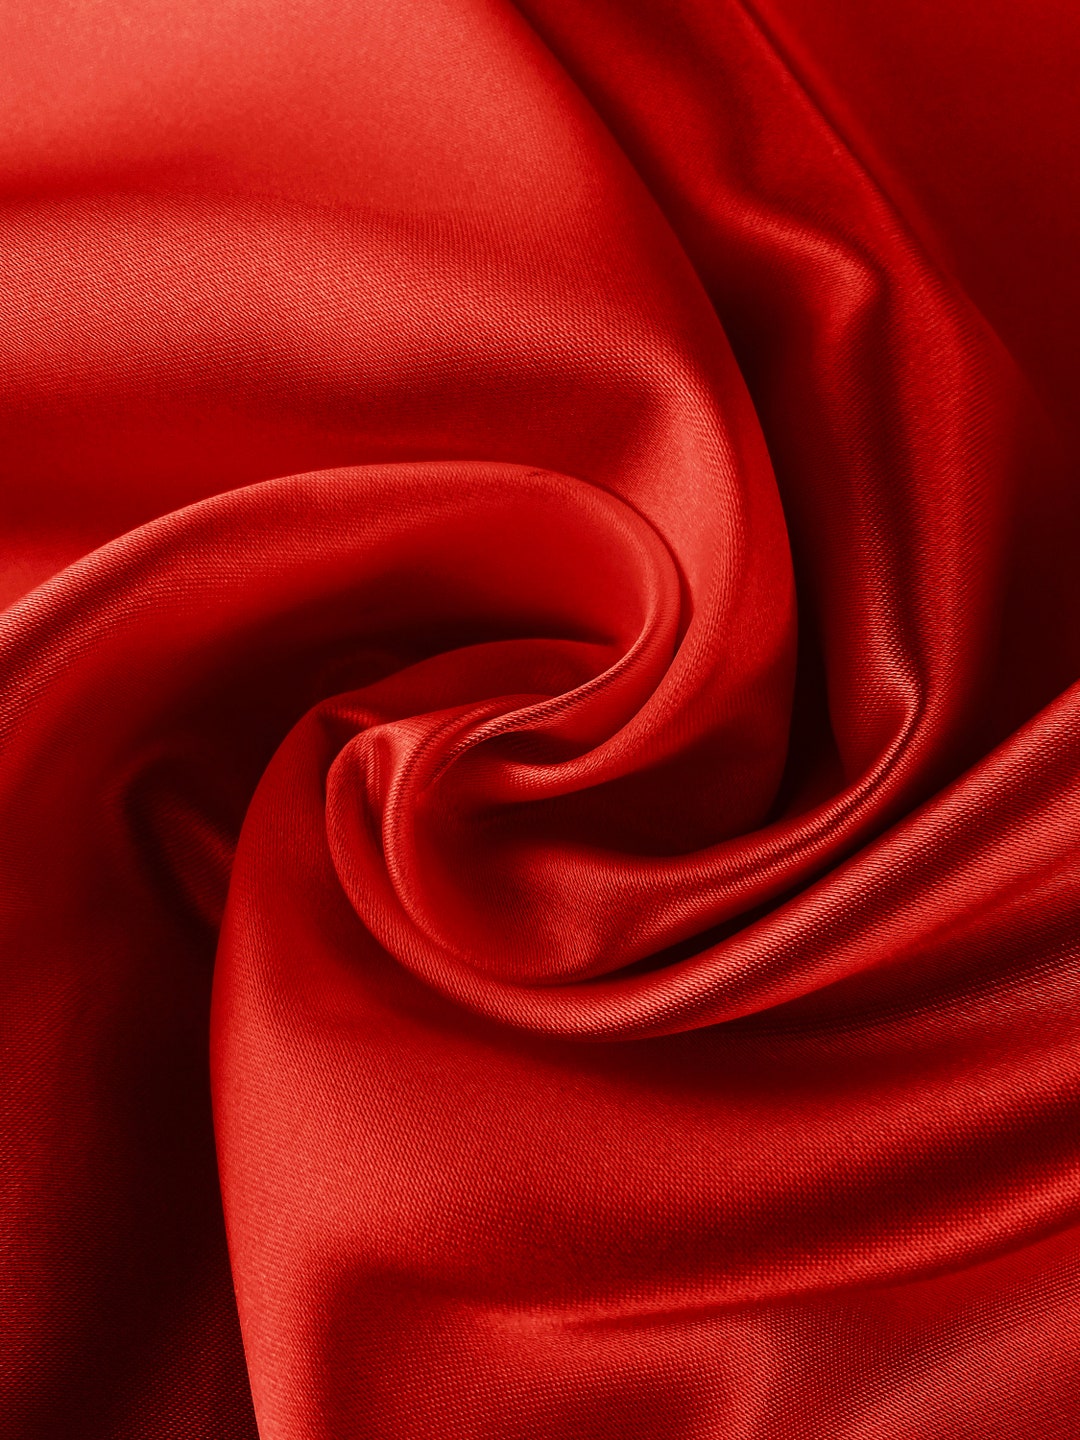 Primary Red SIlky Lining Polyester Apparel/Dress Fabric, 60 Wide